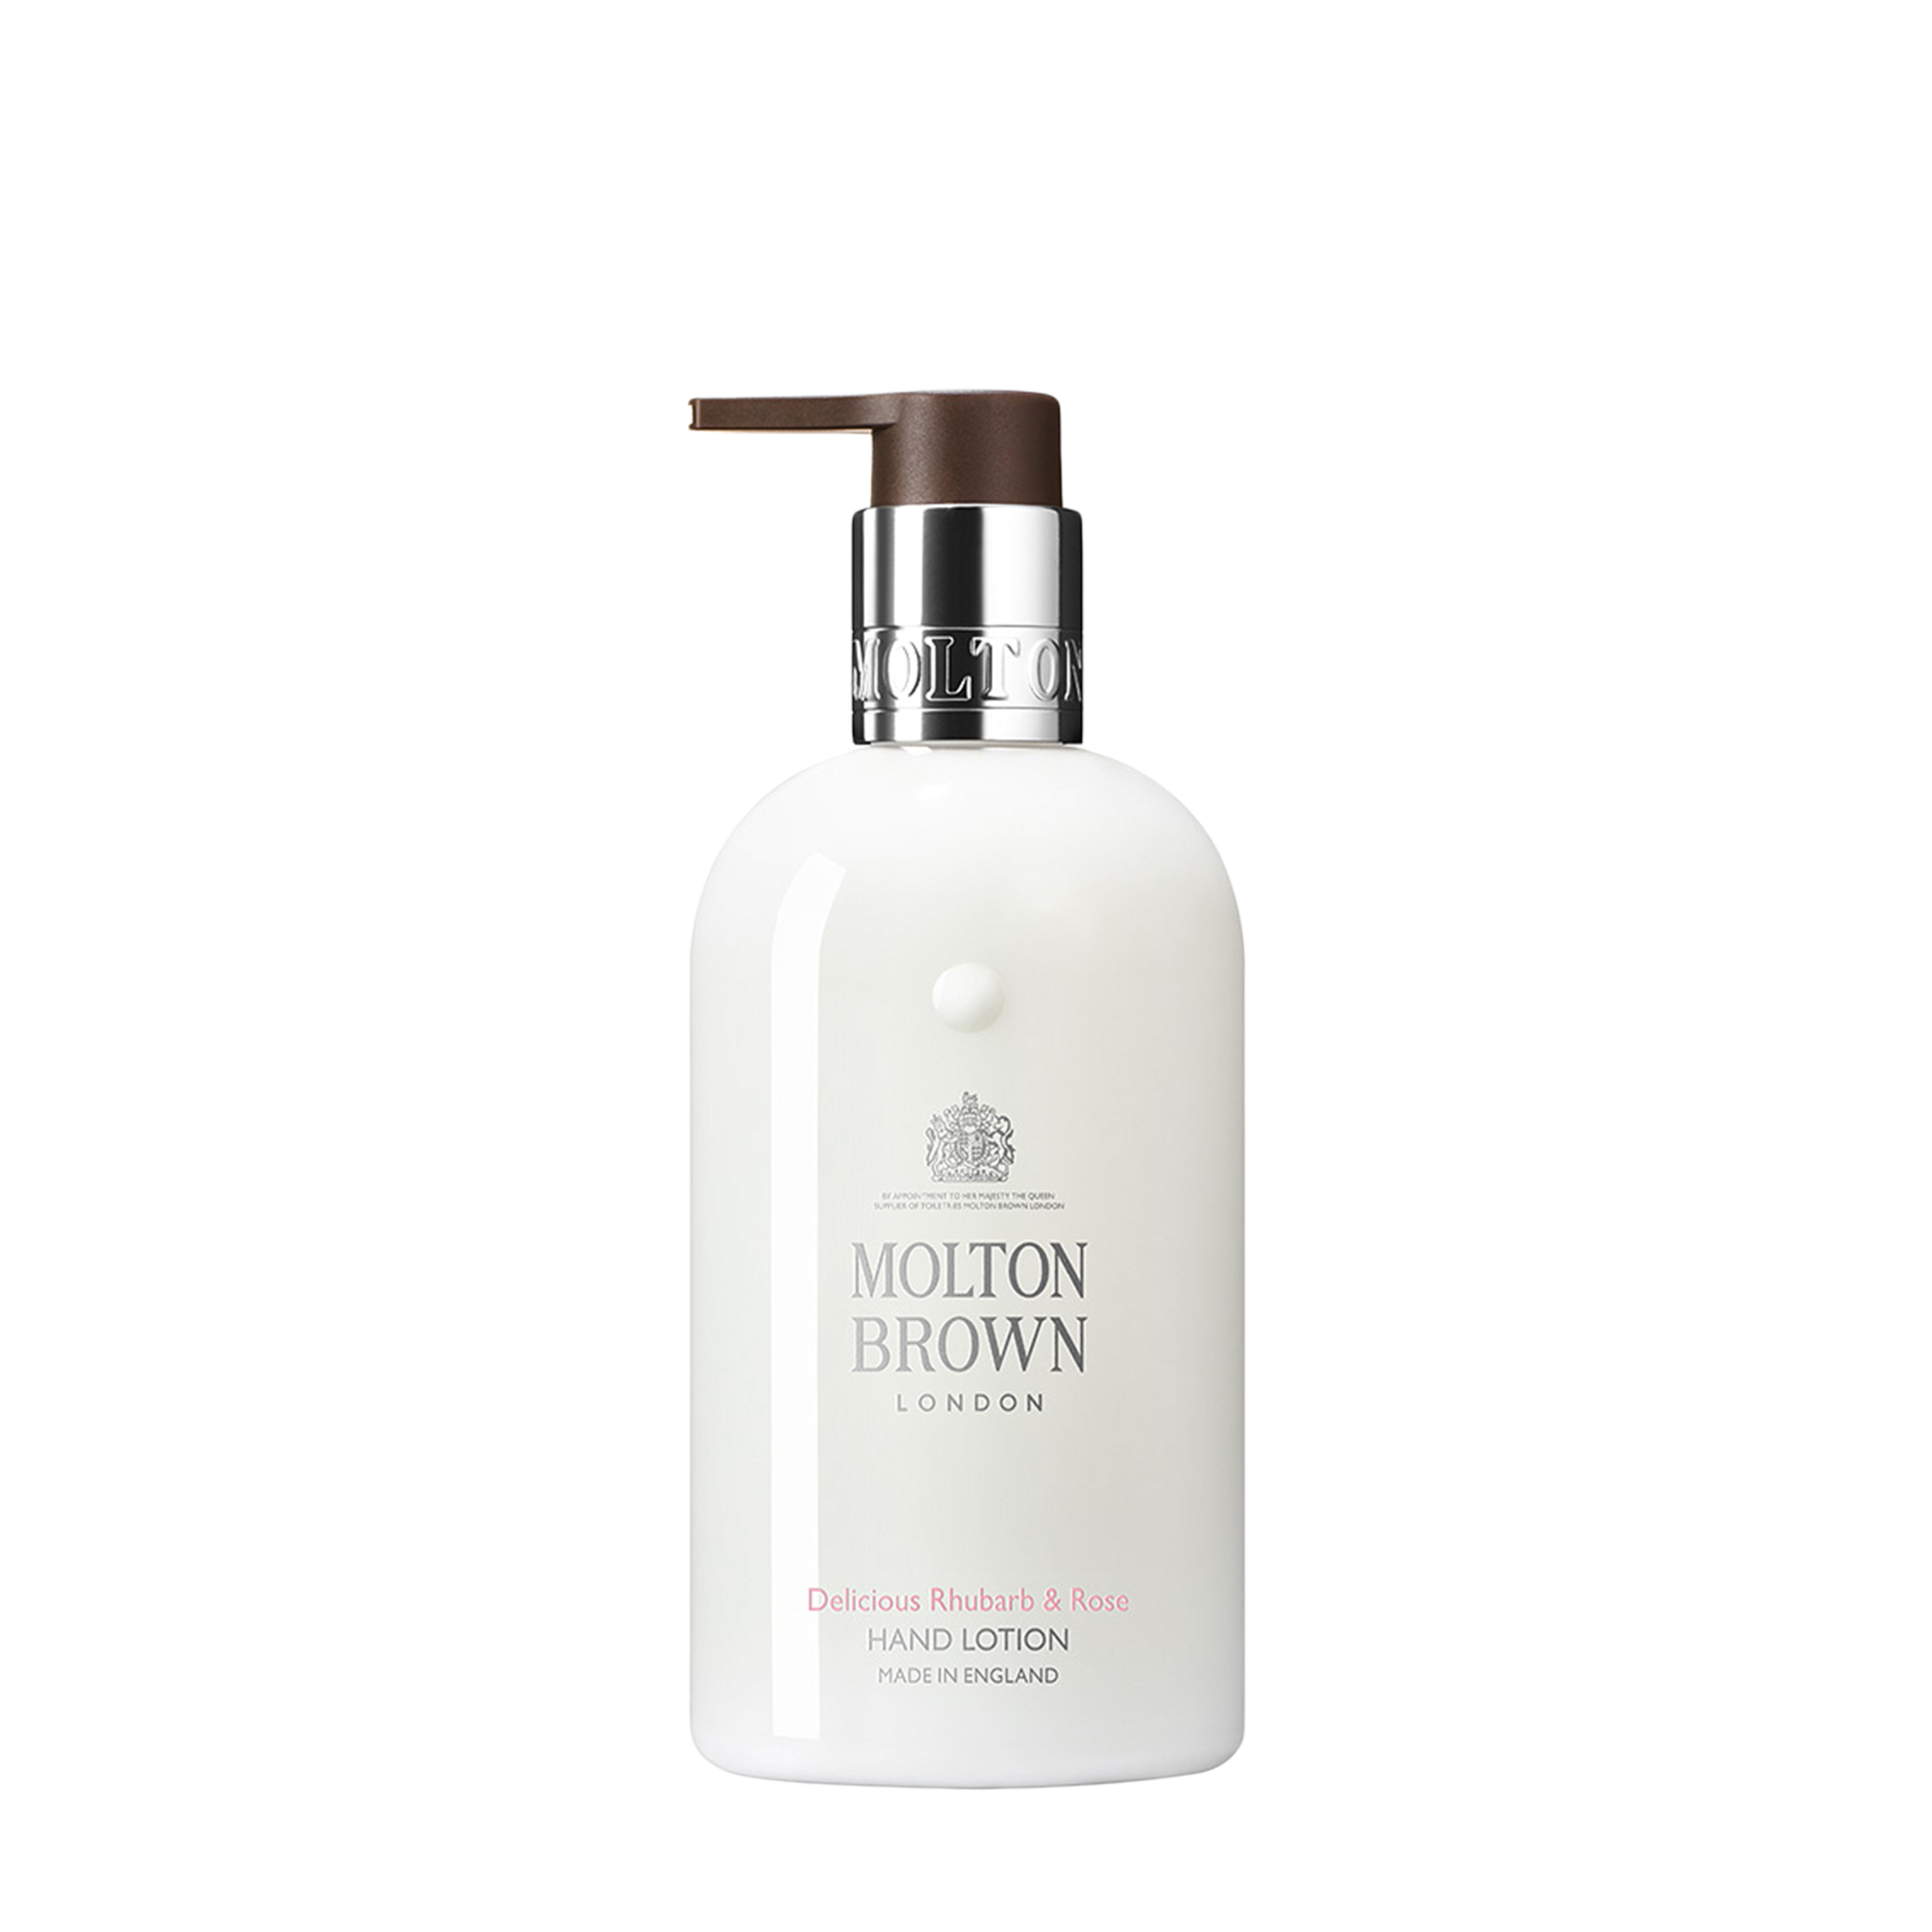 Molton Brown Molton Brown Лосьон для рук Delicious Rhubarb & Rose Hand Lotion 300 мл NHH217 Лосьон для рук Delicious Rhubarb & Rose Hand Lotion 300 мл - фото 1